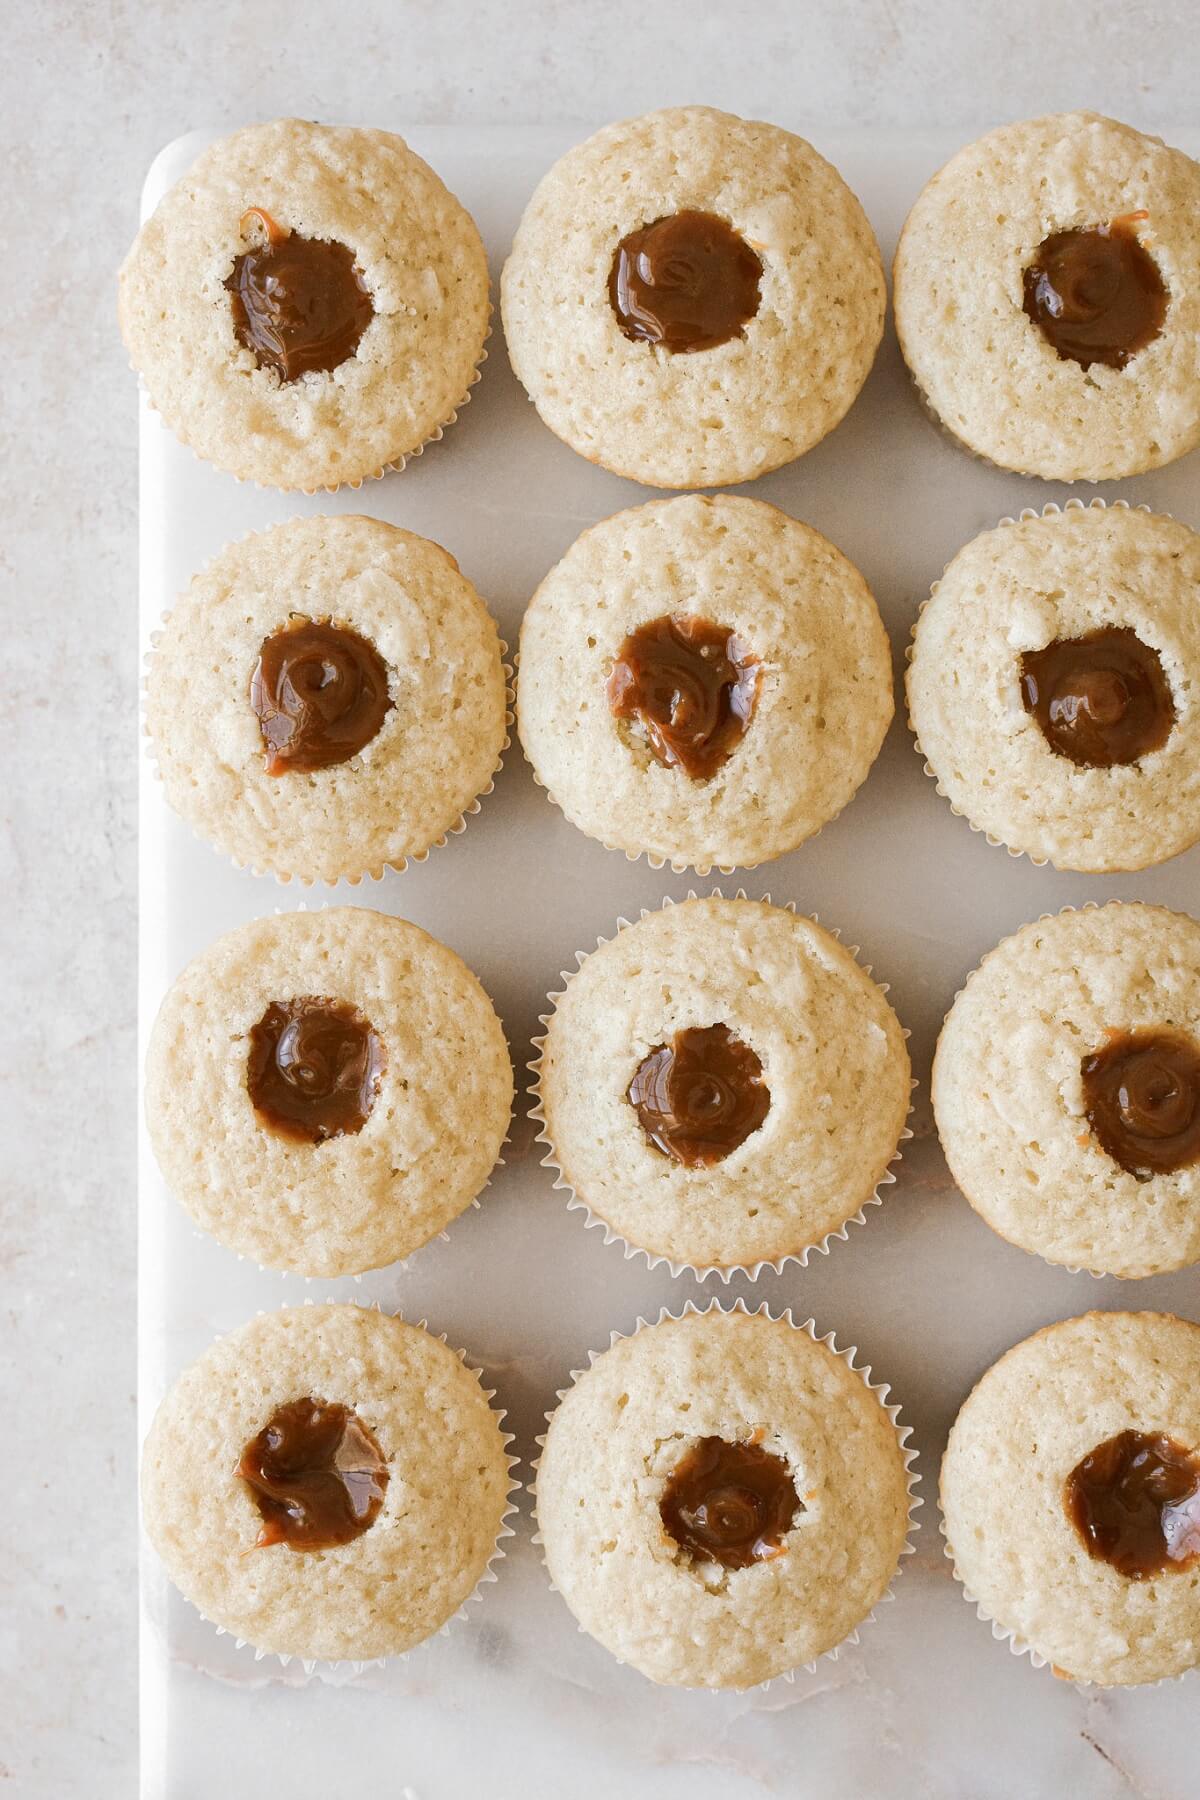 Coconut cupcakes filled with caramel.